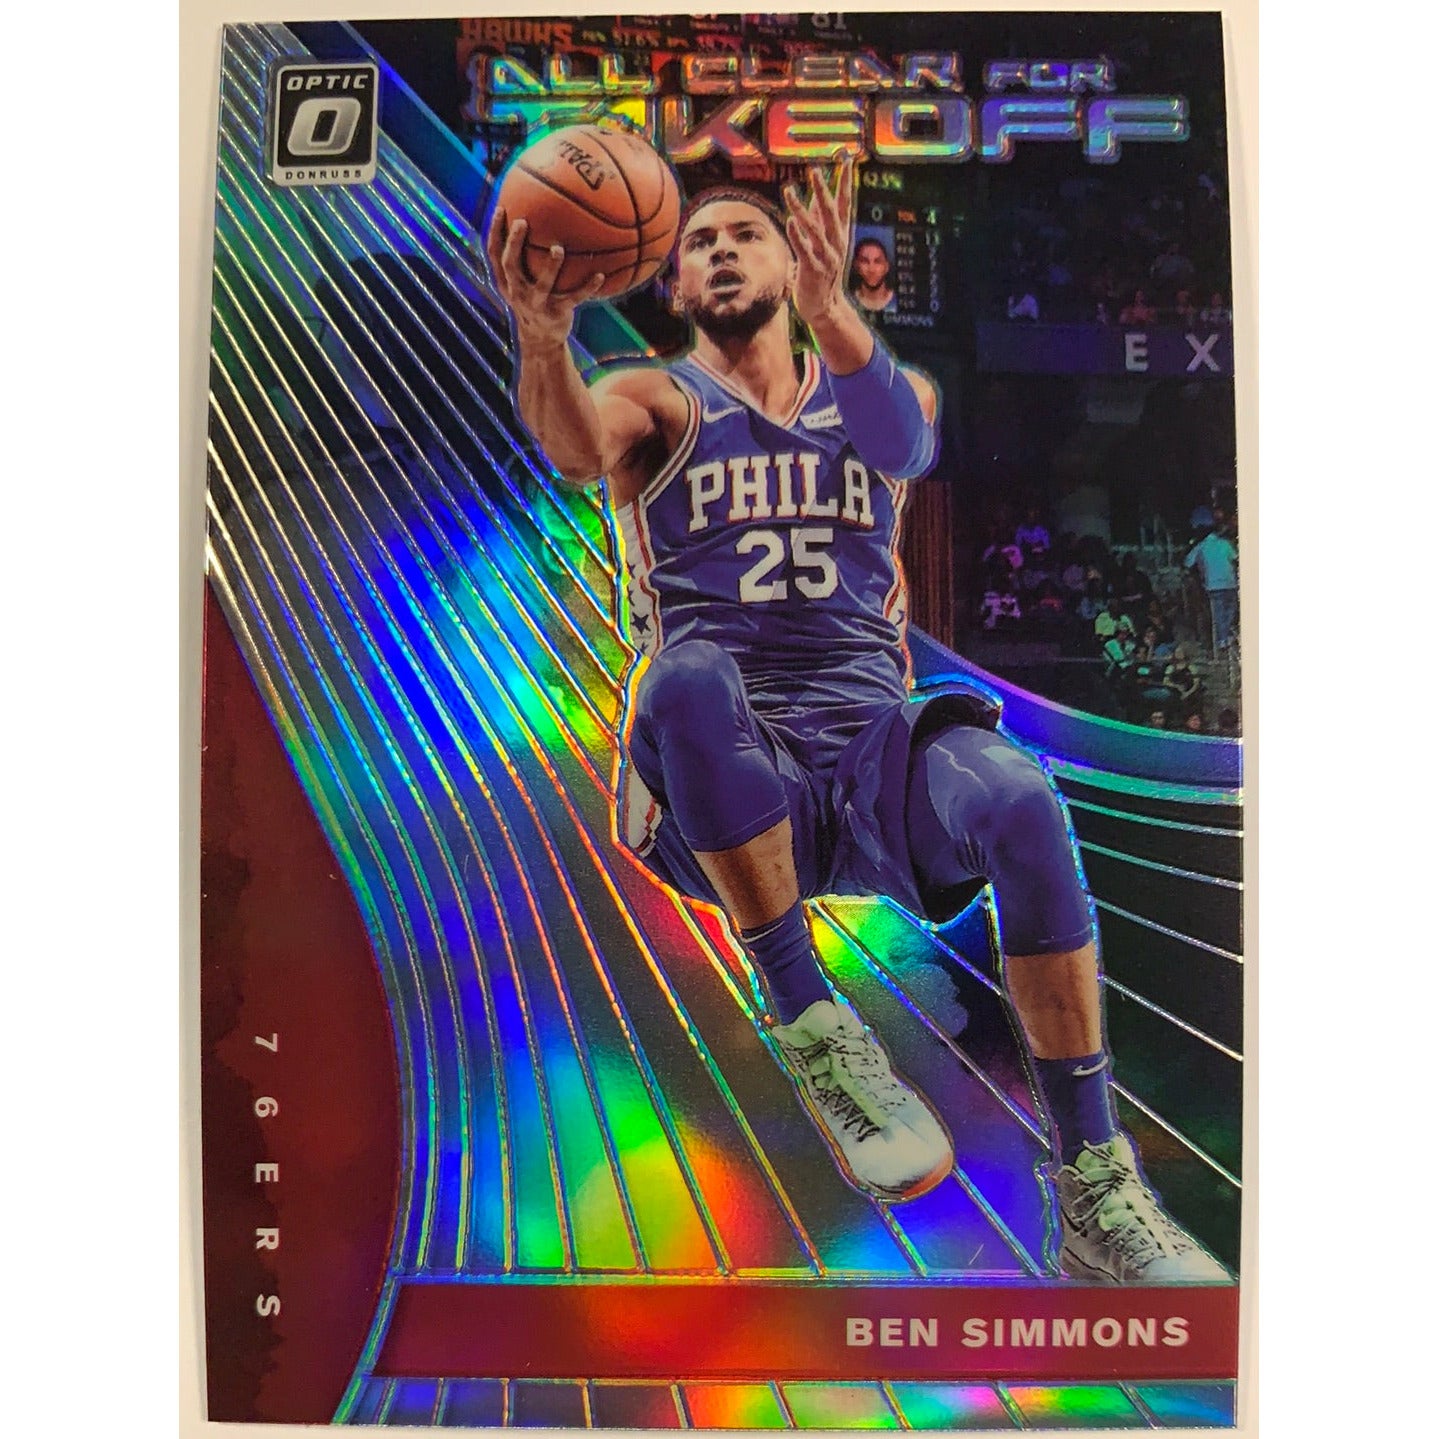  2019-20 Donruss Optic Ben Simmons All Clear For Takeoff Holo Silver Prizm  Local Legends Cards & Collectibles